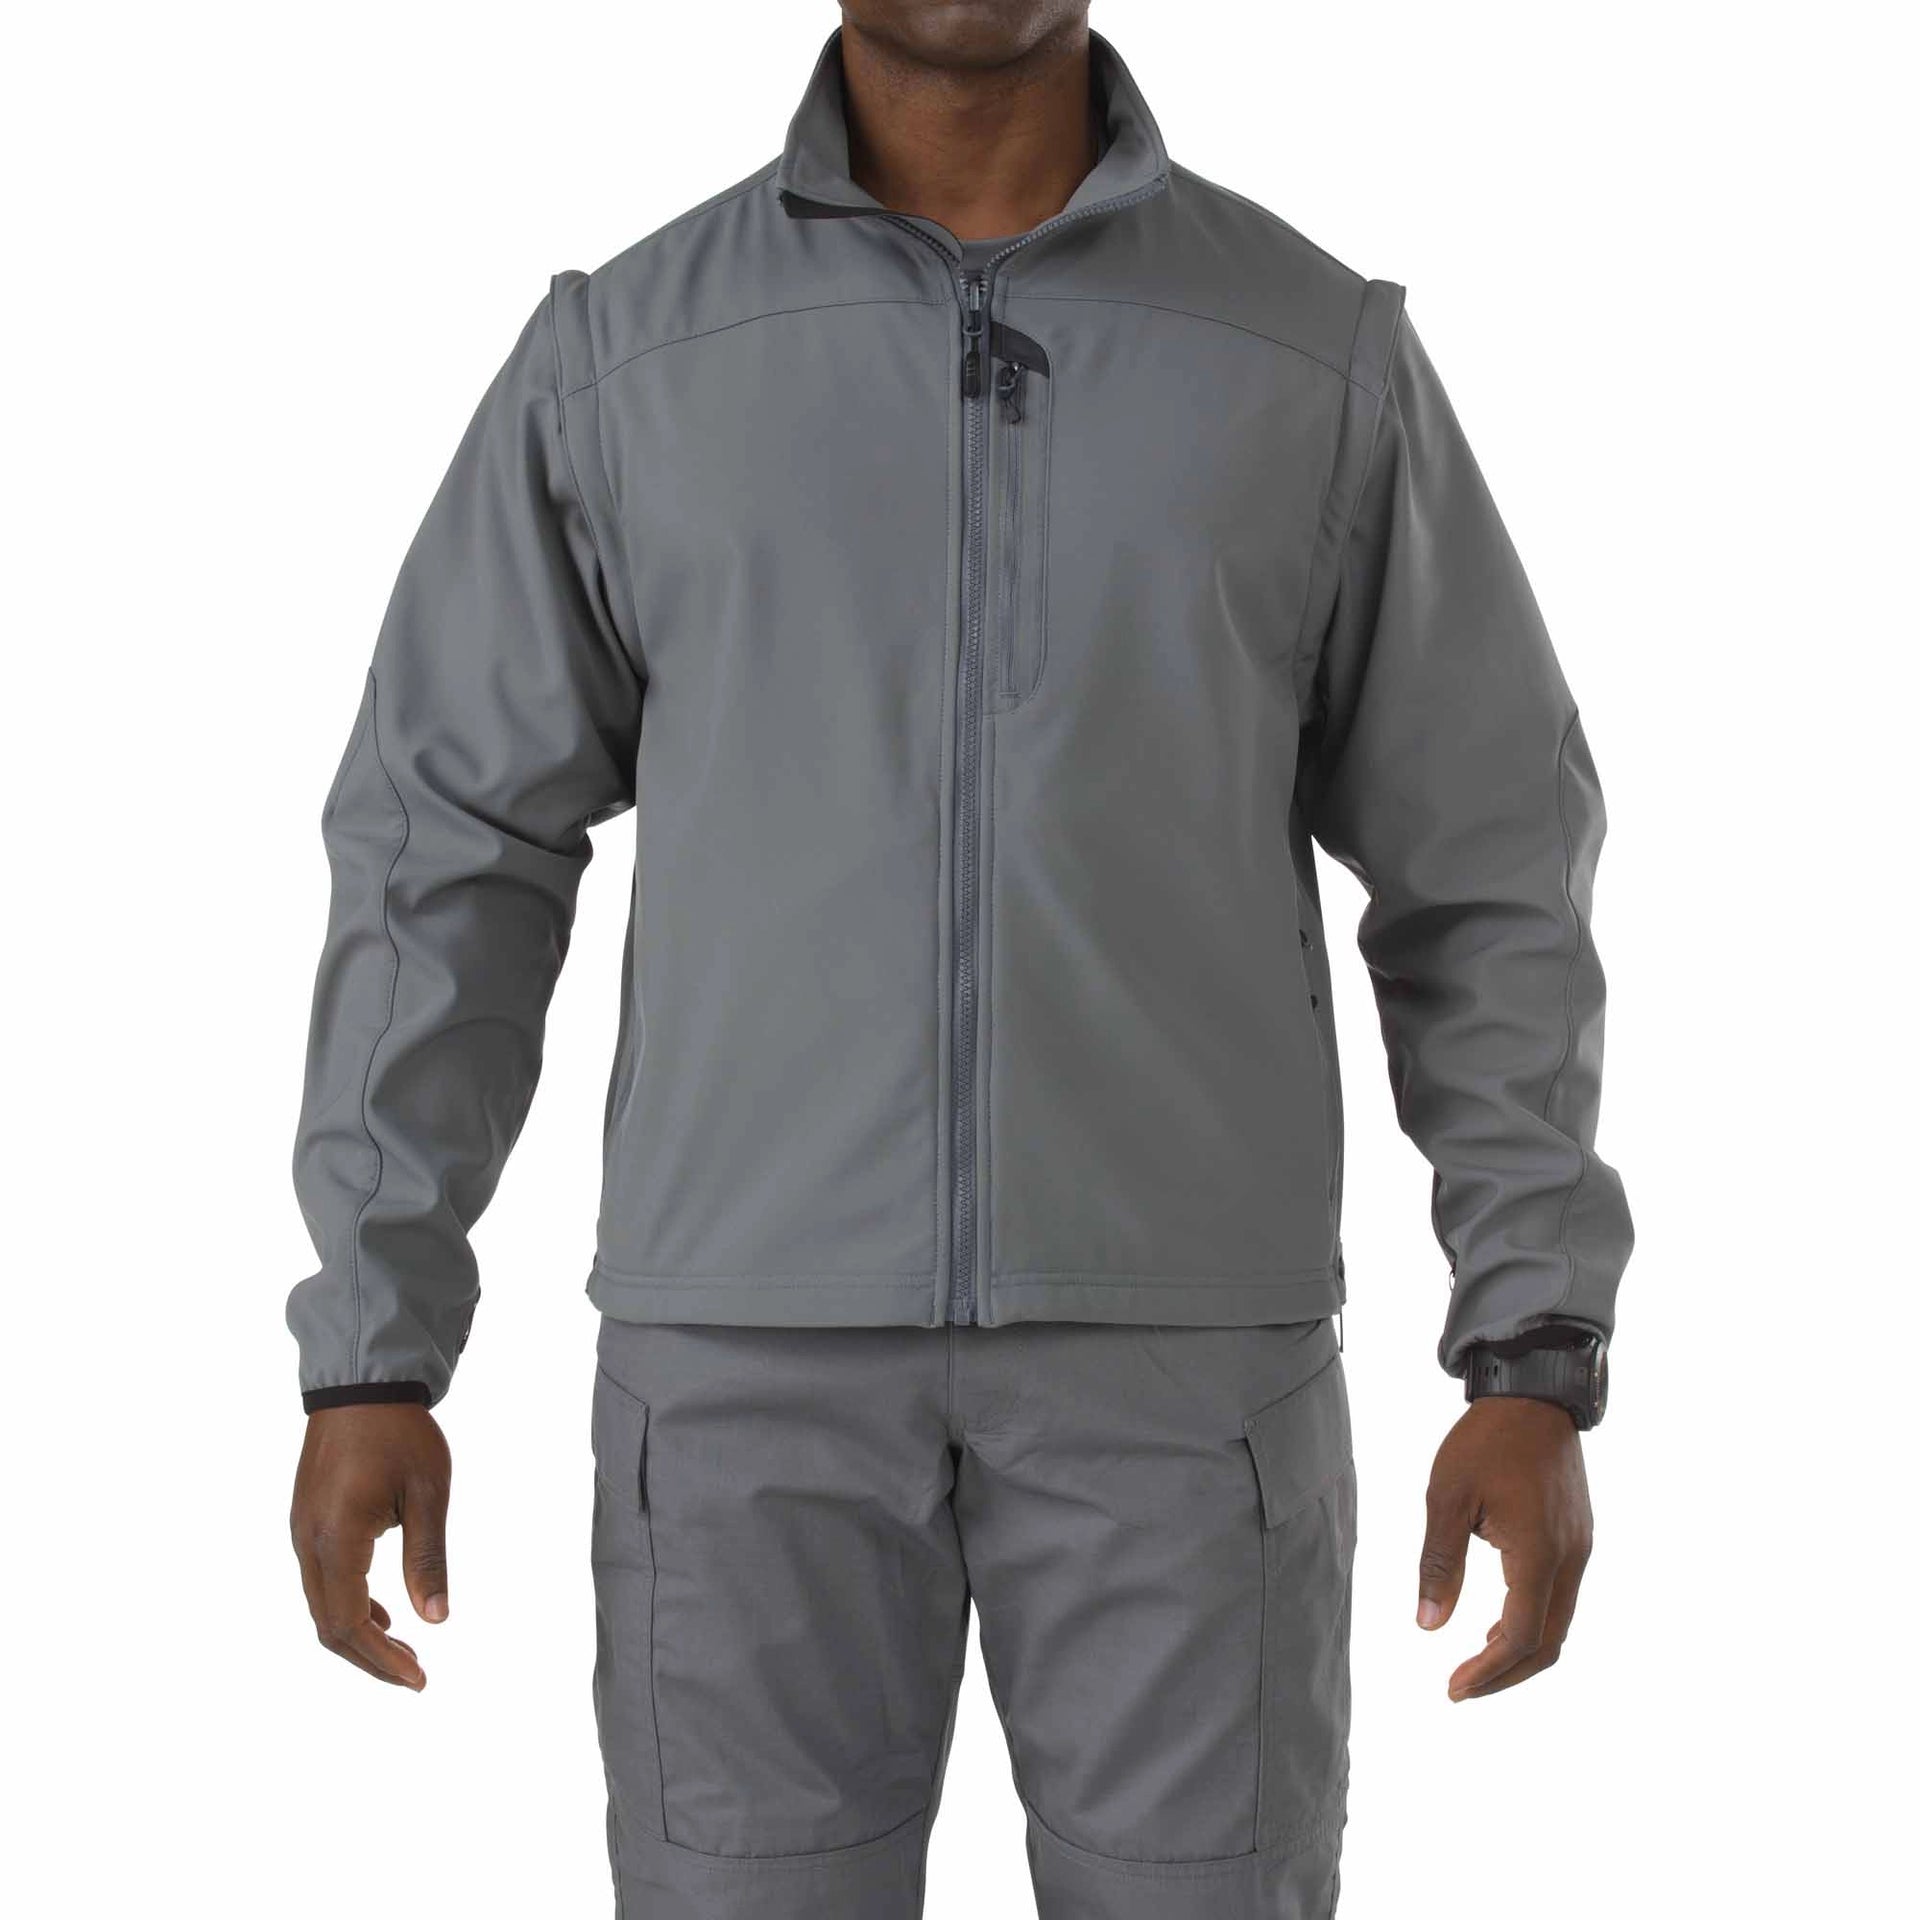 5.11 Tactical Valiant Softshell Jacket (48167) | The Fire Center | Fuego Fire Center | Ideal for light patrol duty wear, the Valiant Softshell Jacket is crafted from wind resistant bonded polyester fabric for superior protection against wind and rain.